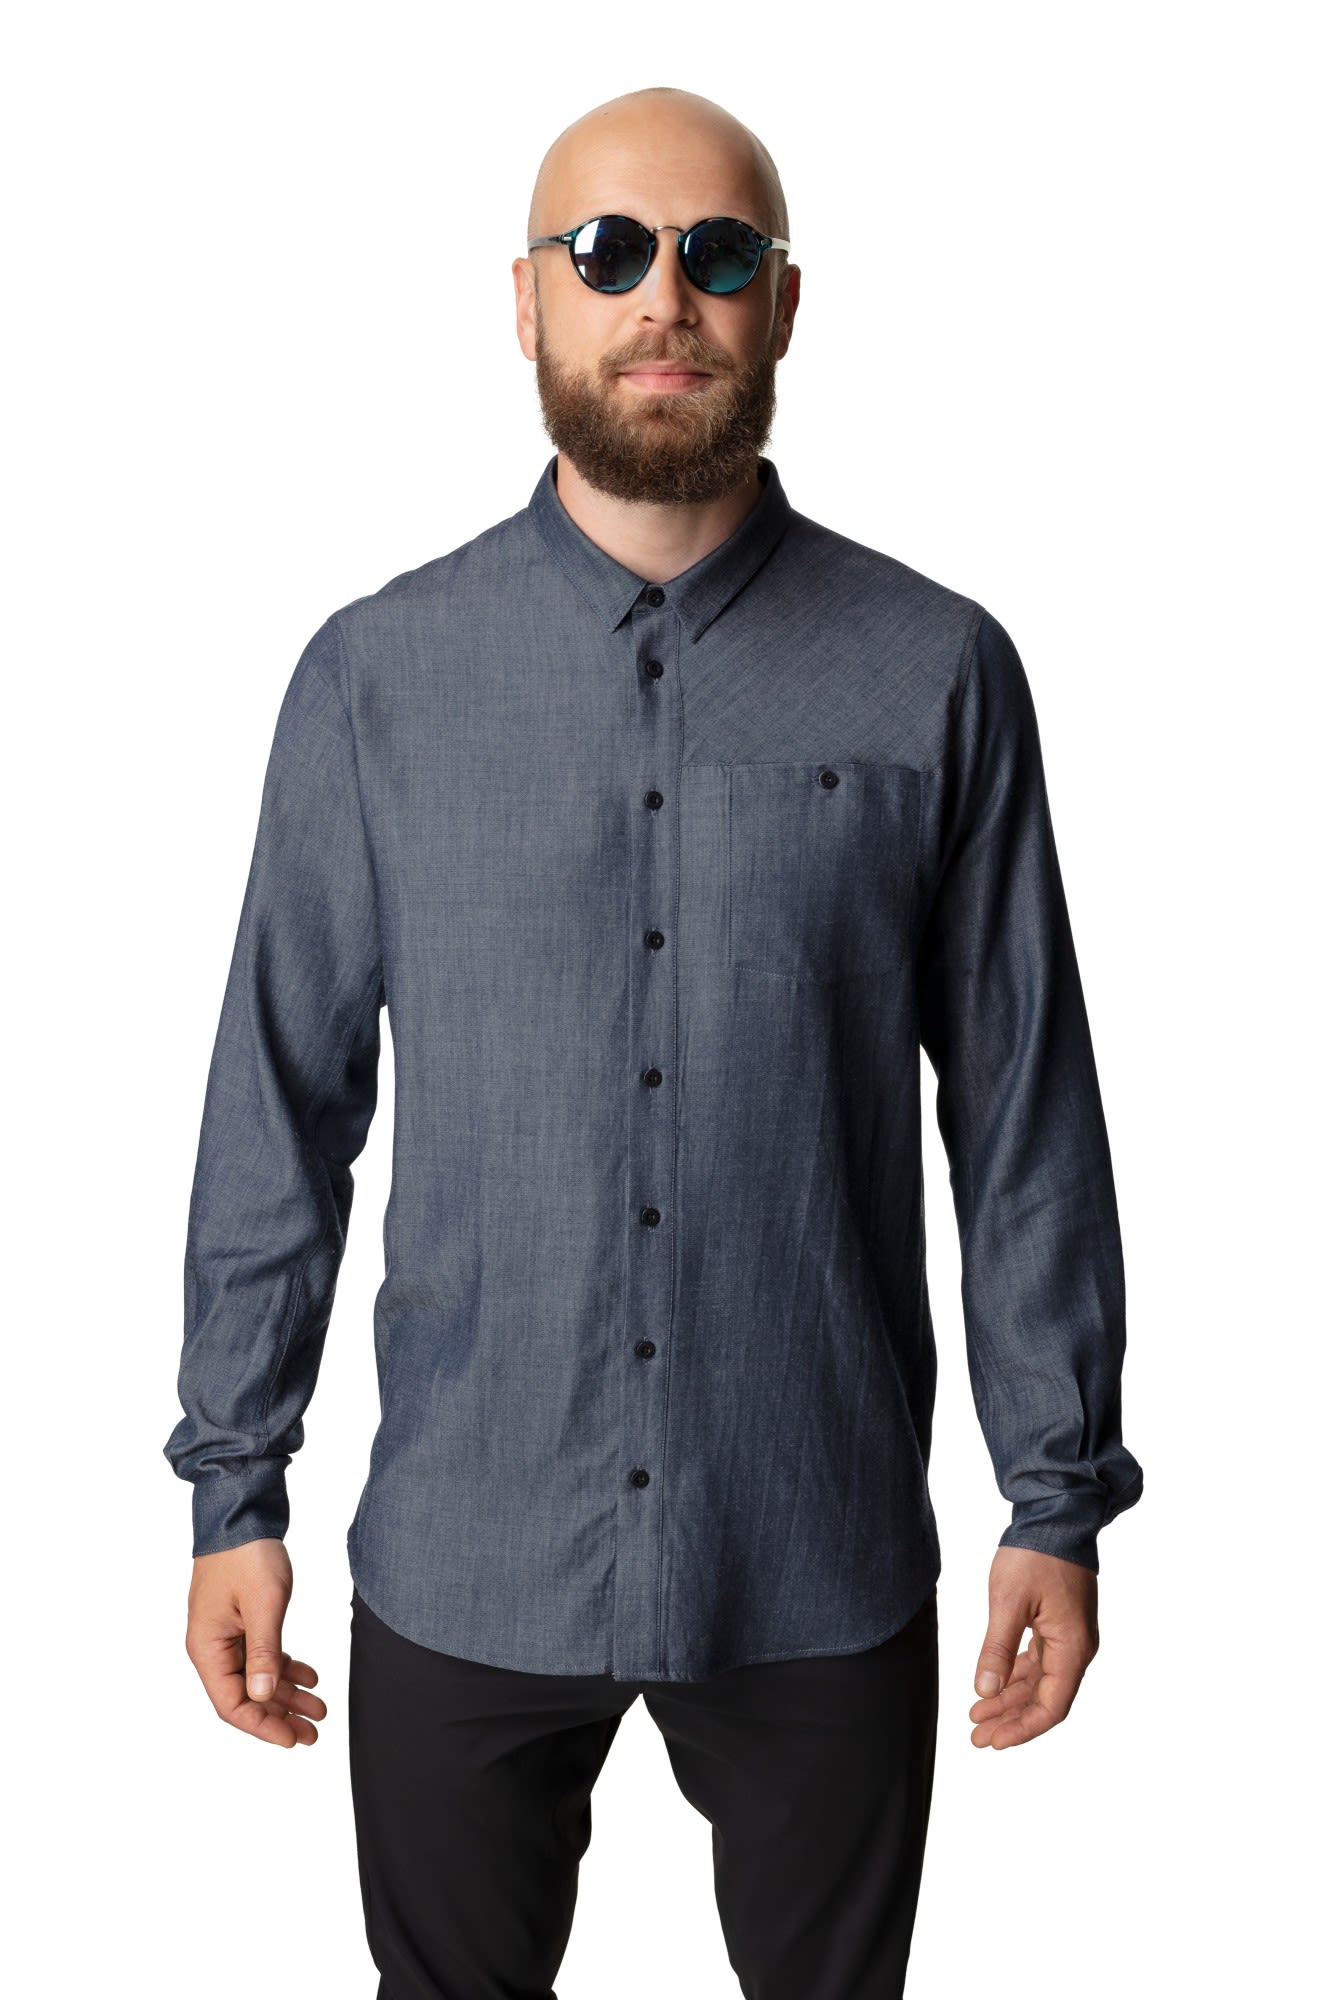 Houdini OUT and About Shirt Blau- Male Merino Hemden- Grsse XS - Farbe Blue Illusion